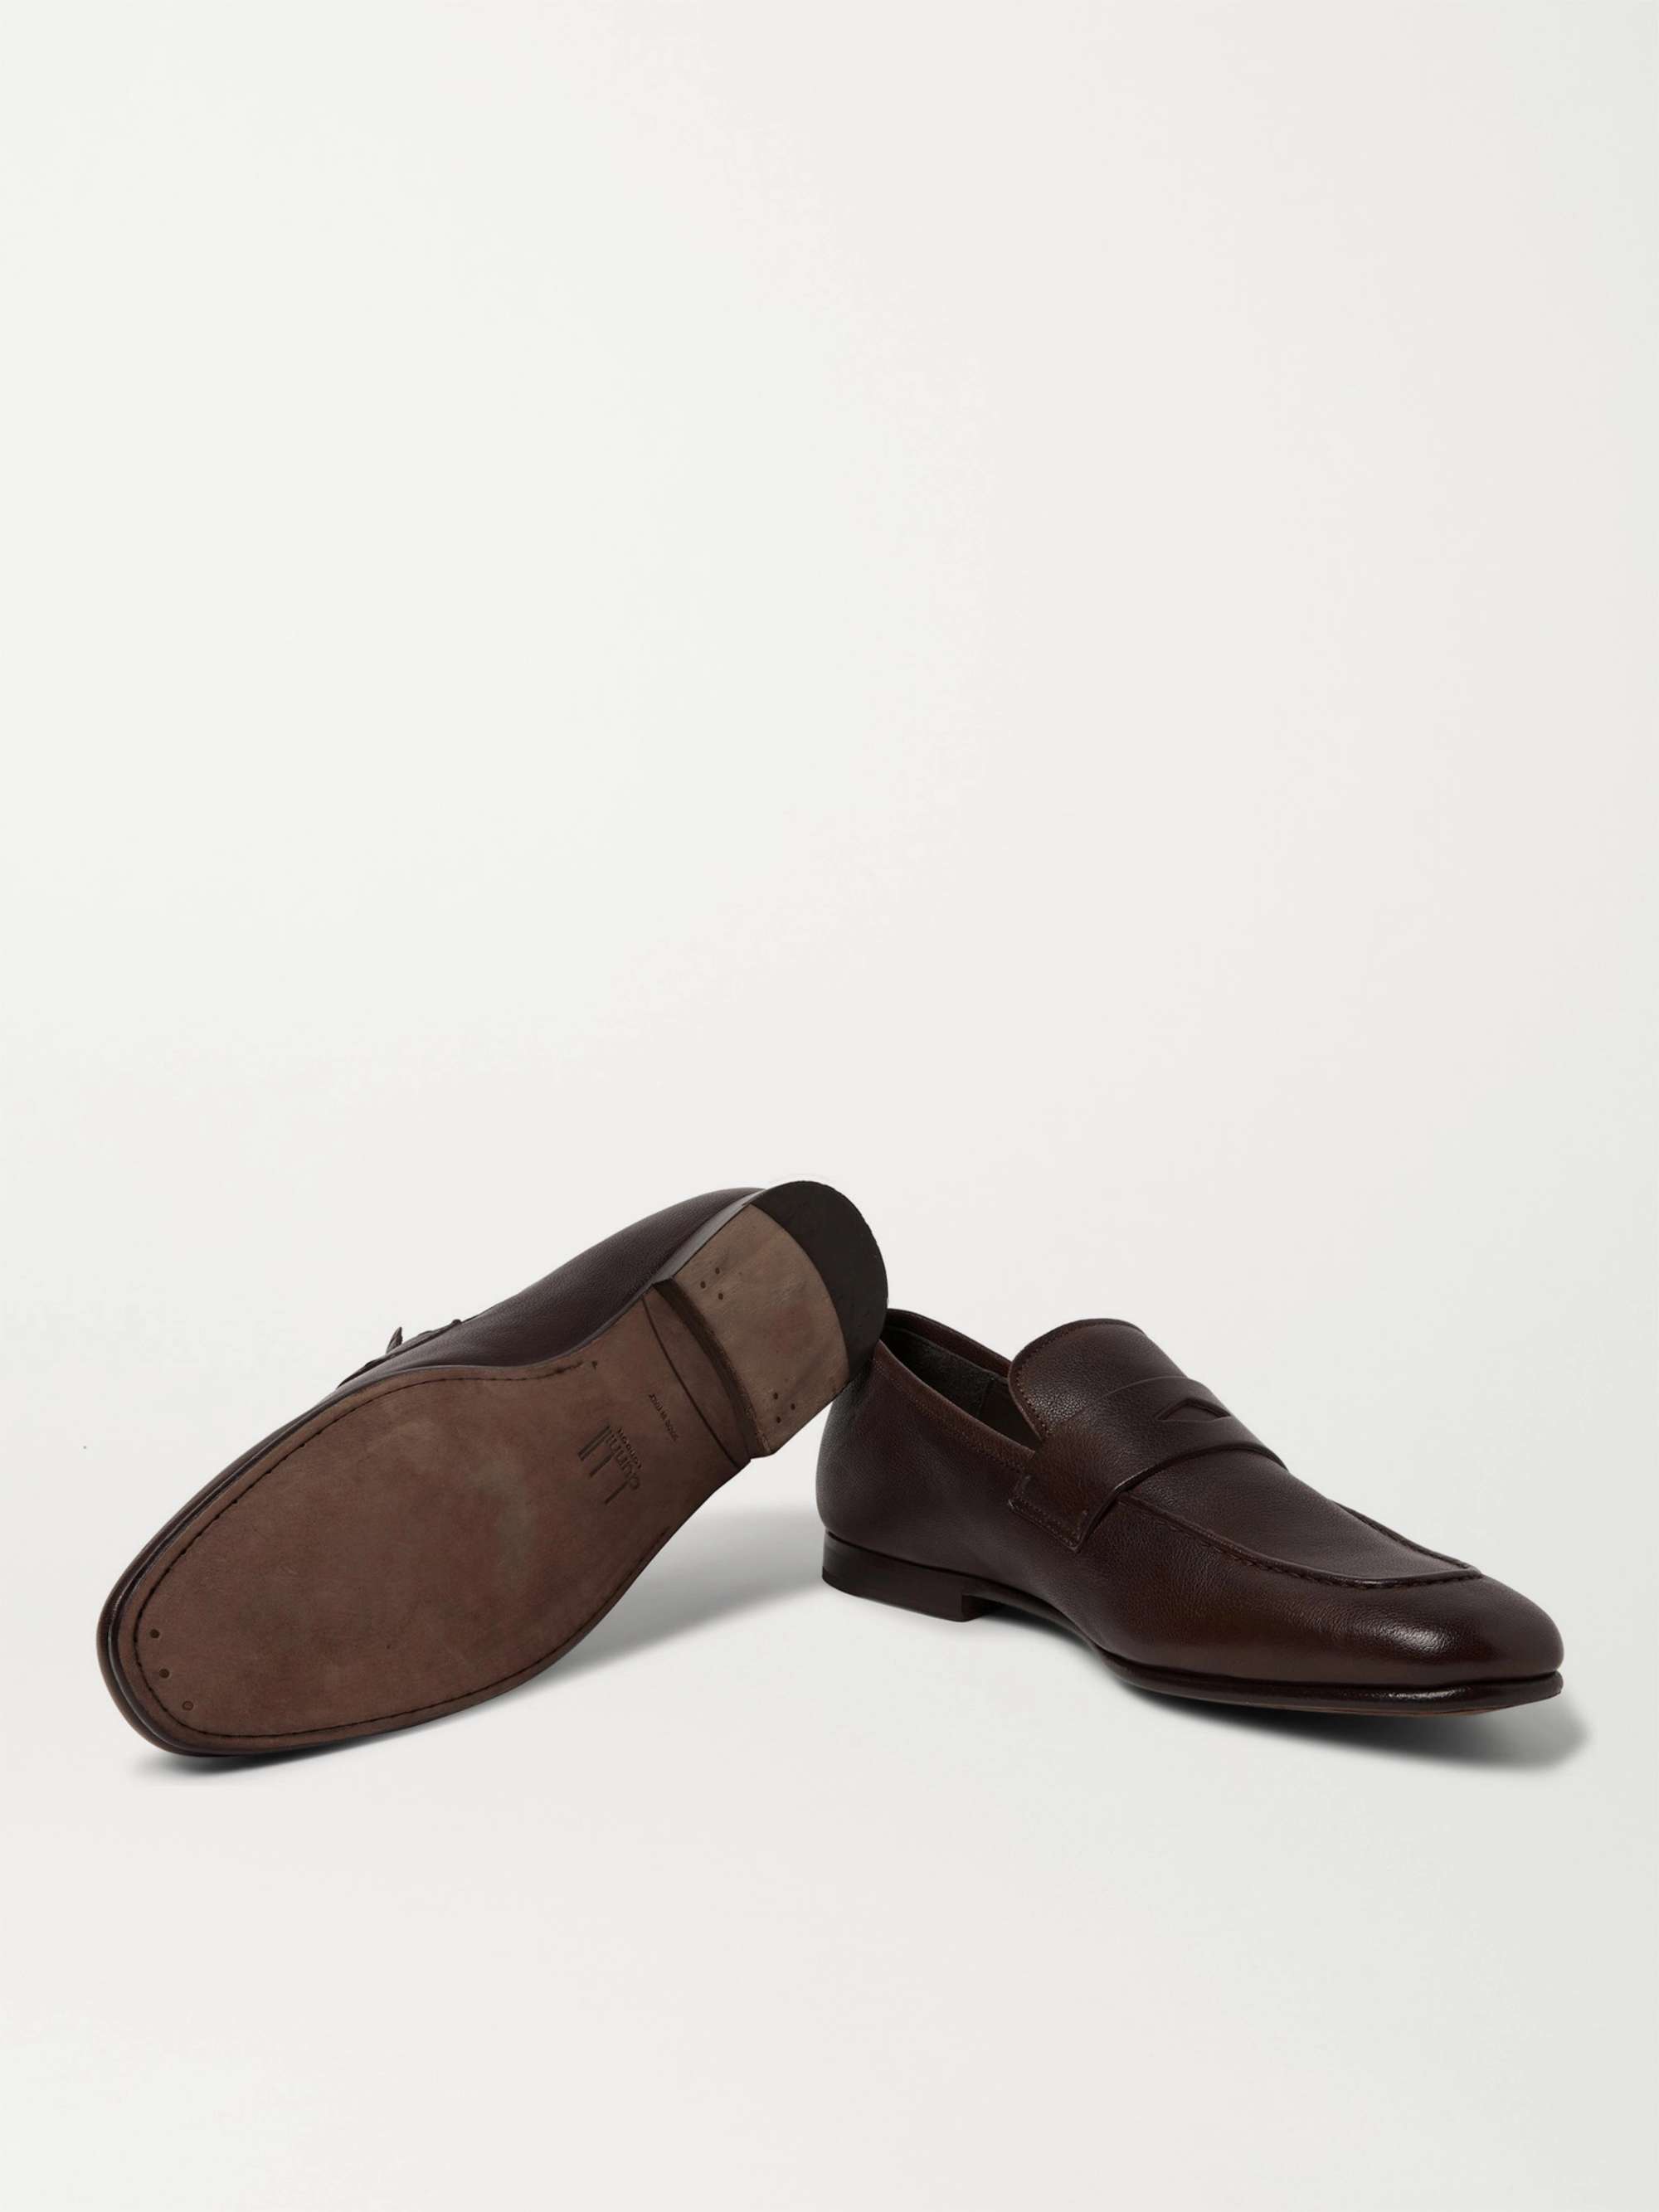 DUNHILL Chiltern Leather Loafers